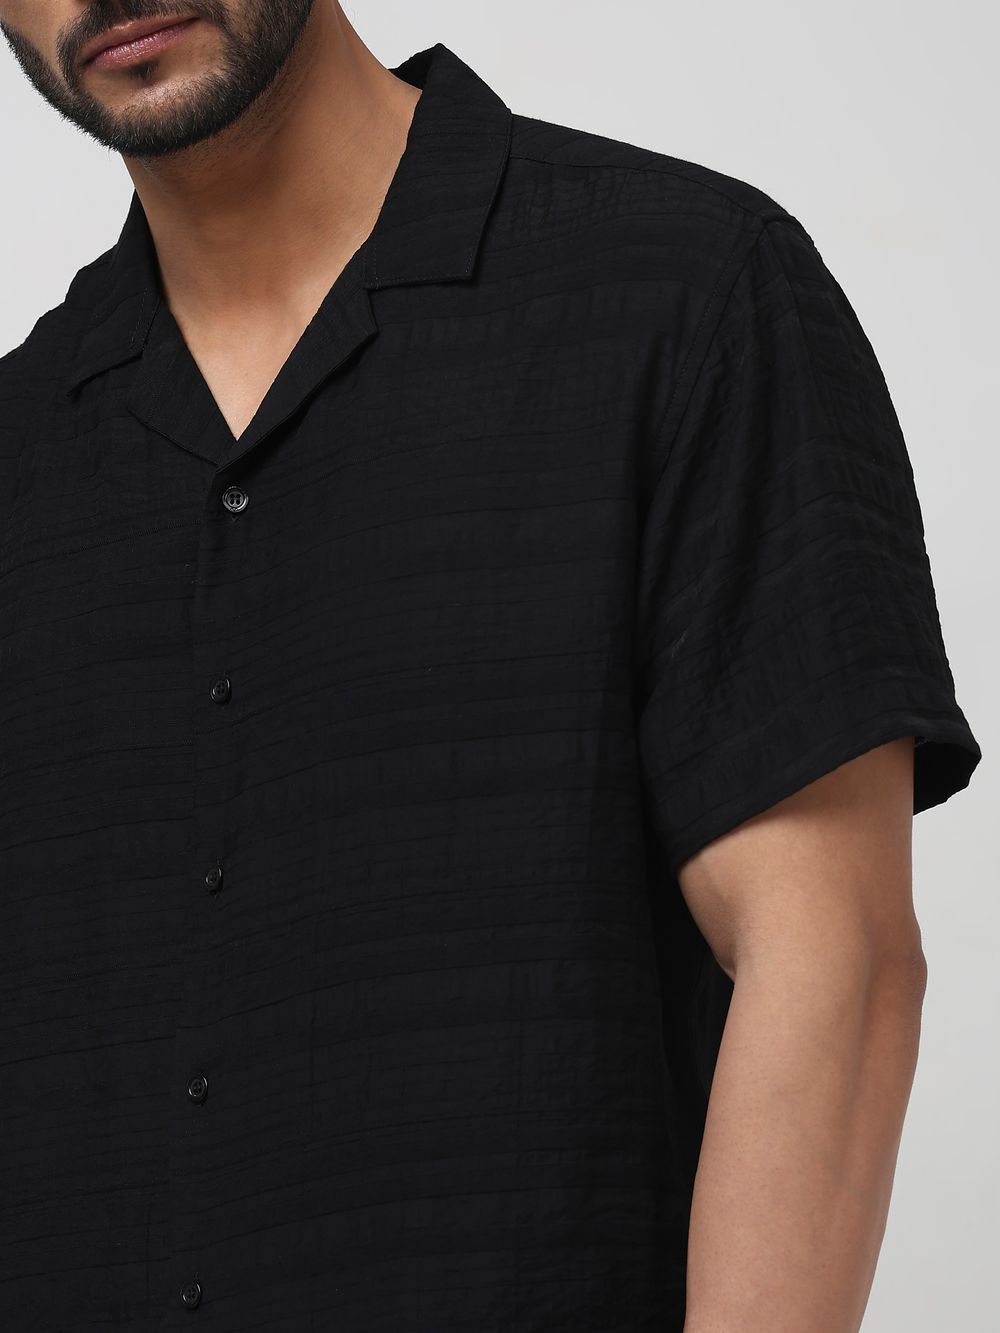 Black Textured Plain Relaxed Fit Casual Shirt